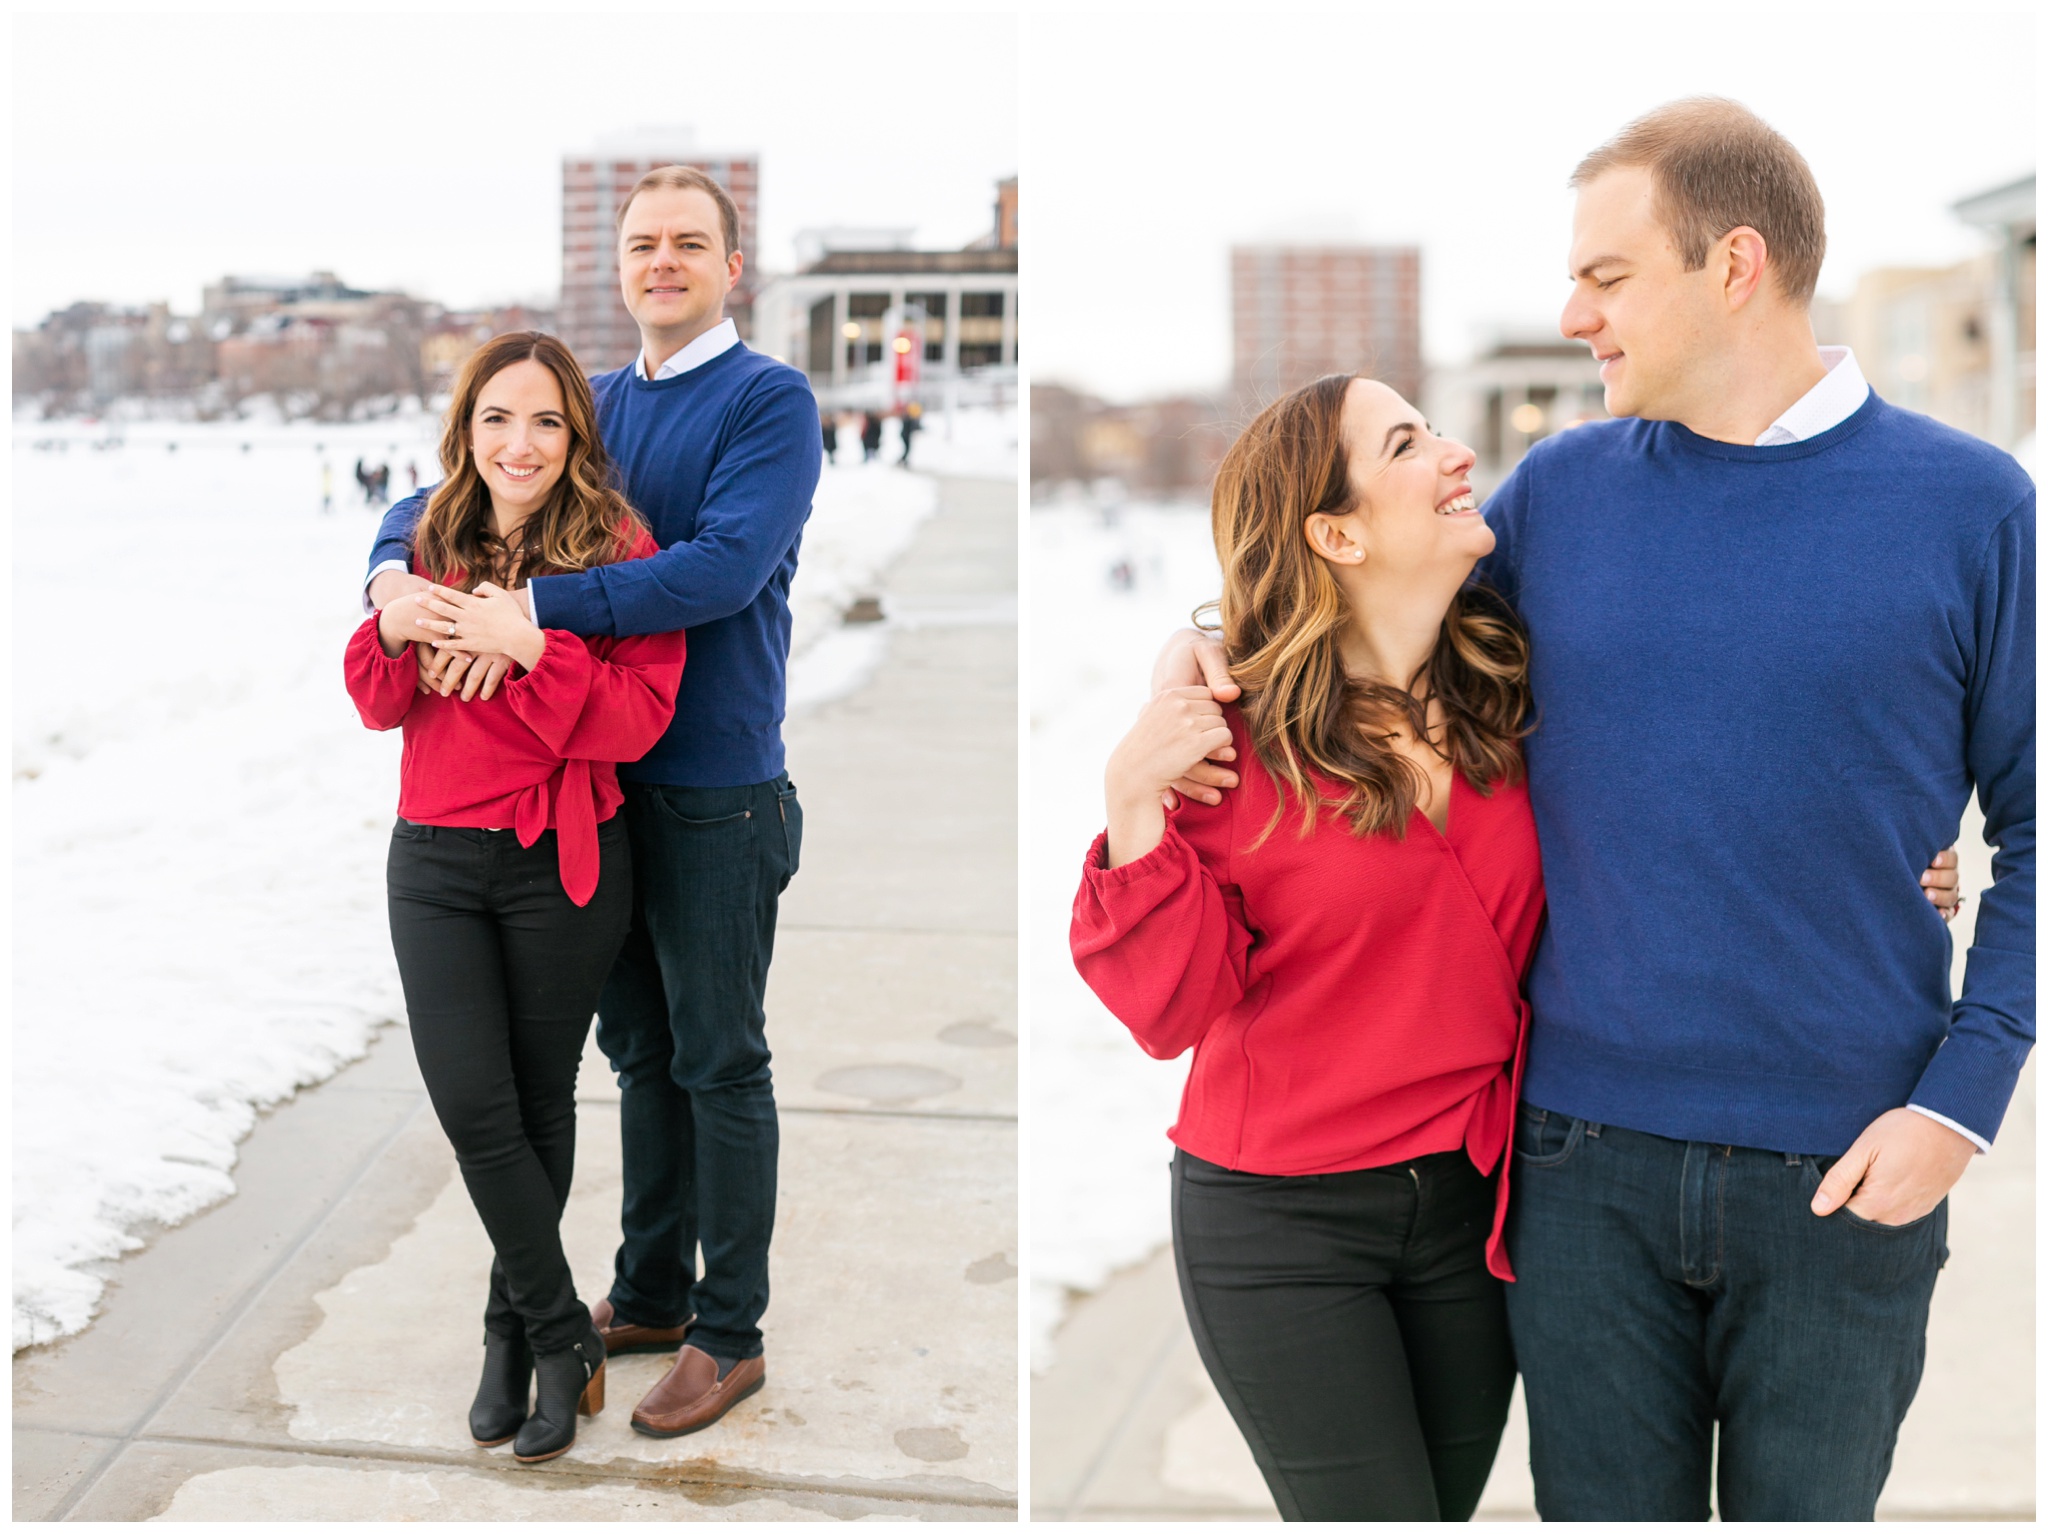 Memorial_Union_engagement_session_caynay_photo_2889.jpg